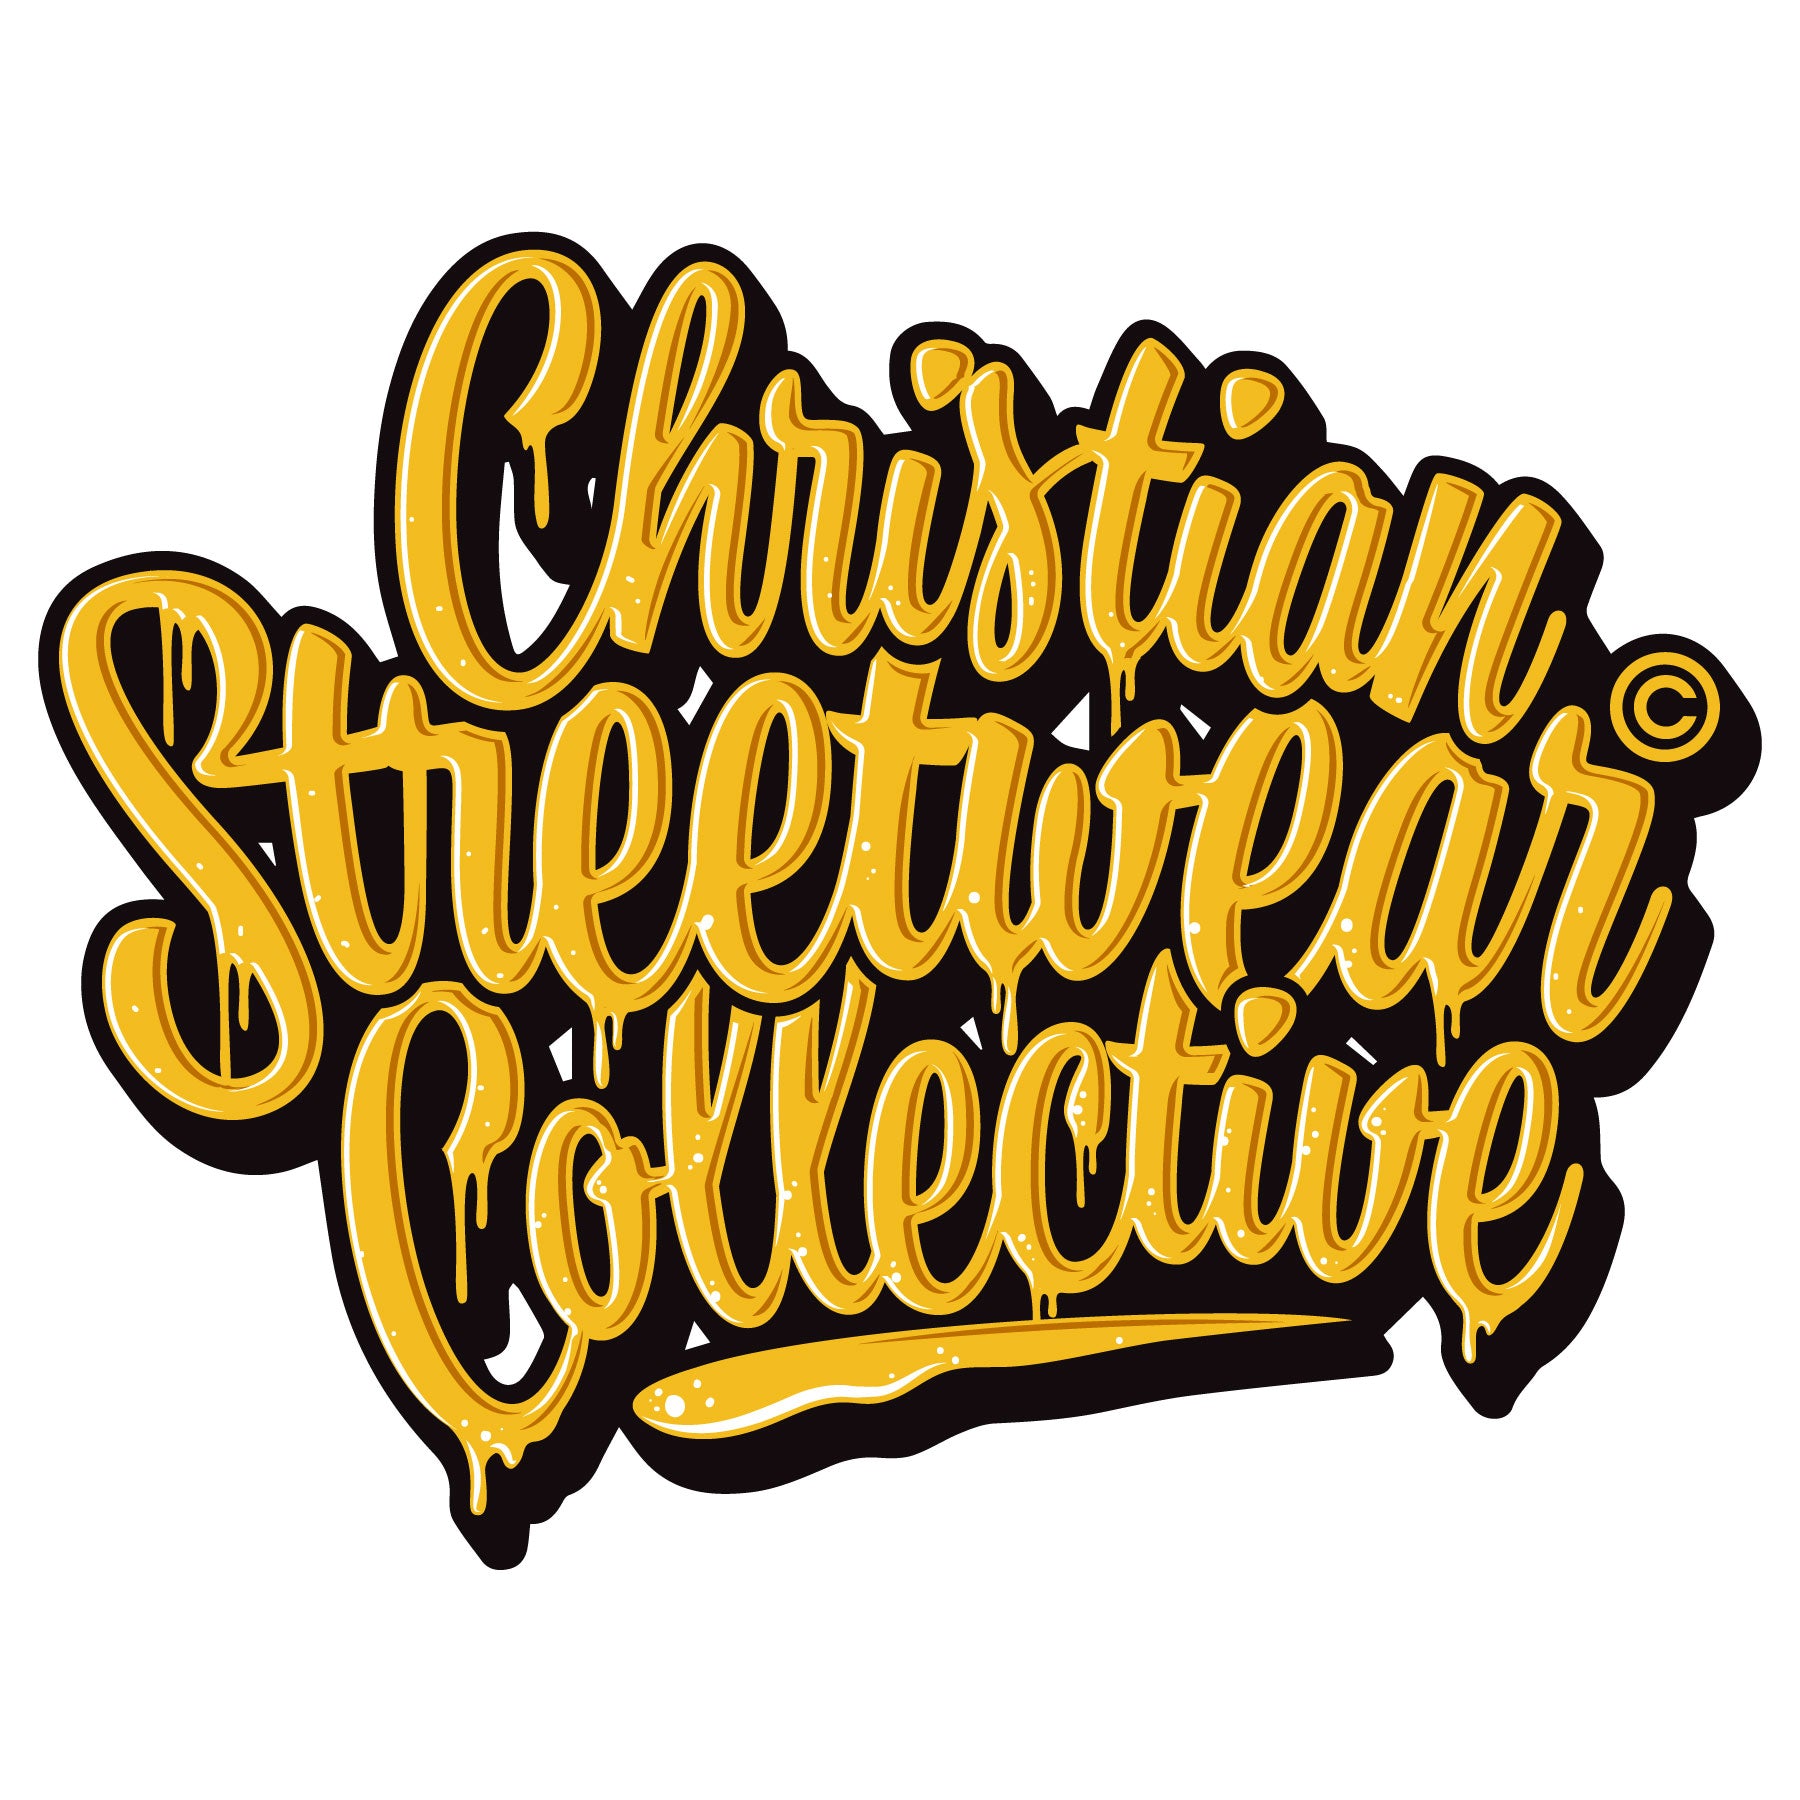 CSC COMMUNITY  CHRISTIAN STREETWEAR COLLECTIVE©